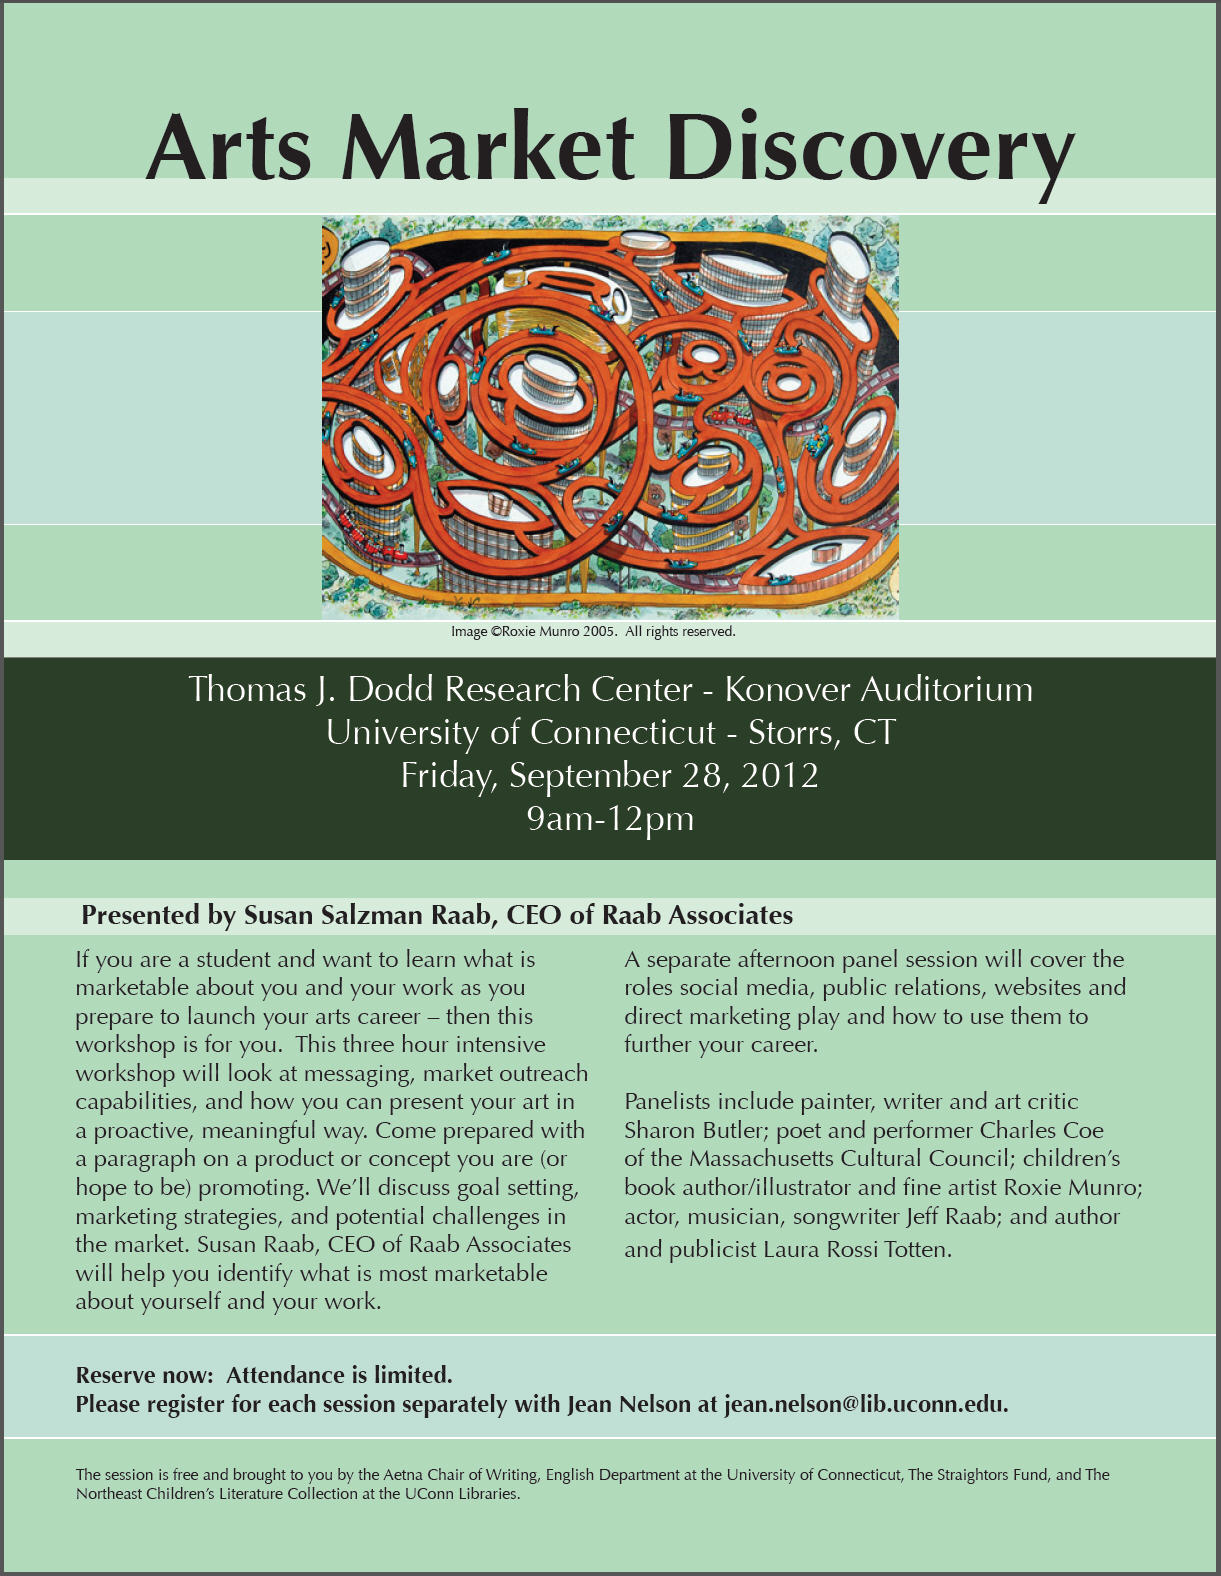 "Arts Market Discovery" 9/28/2012 Dodd Research Center, Storrs, CT